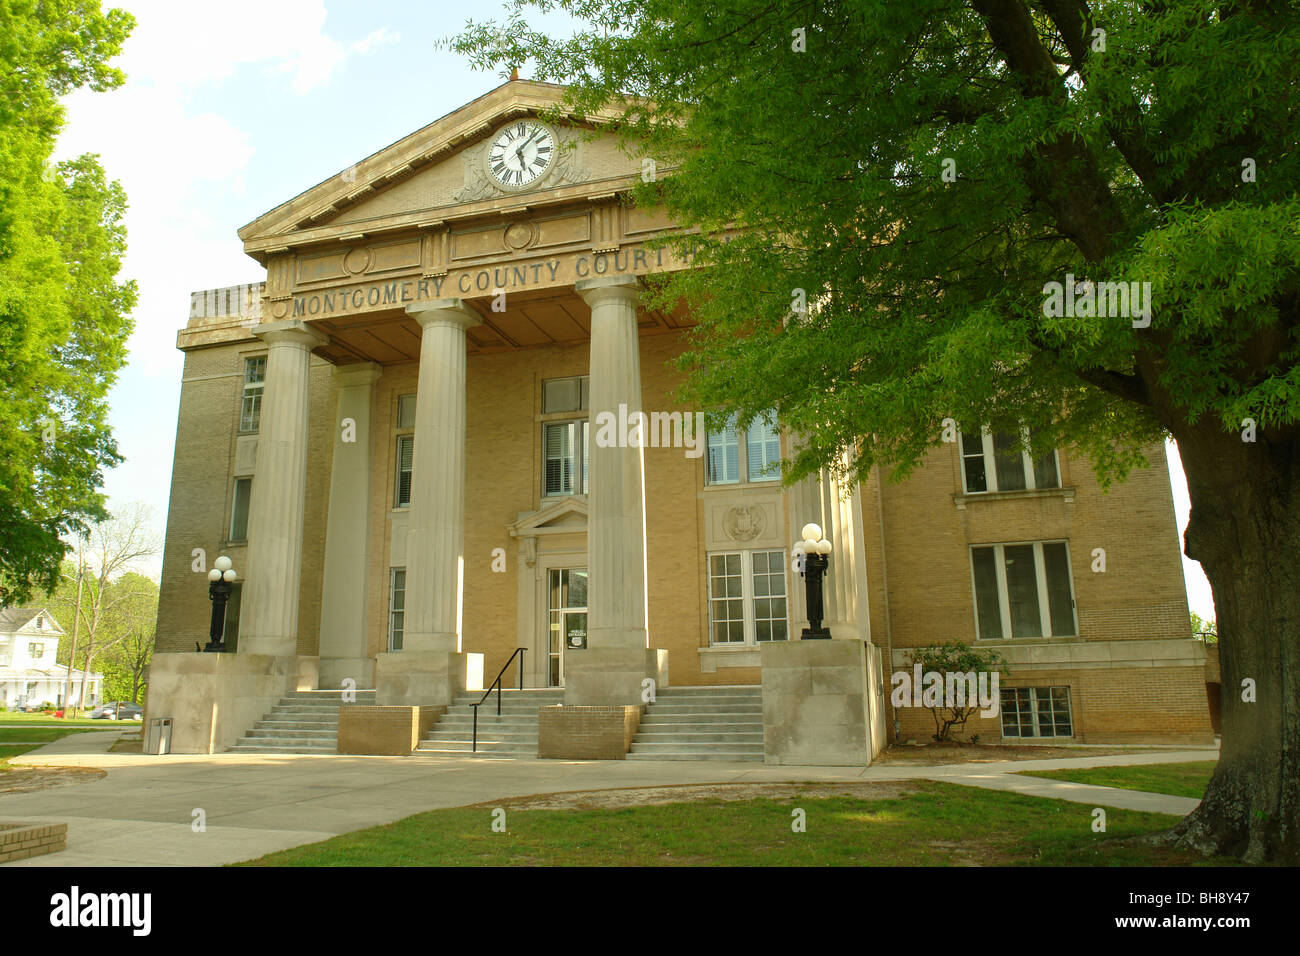 AJD64322, Troy, NC, North Carolina, downtown, Montgomery County Courthouse Stock Photo